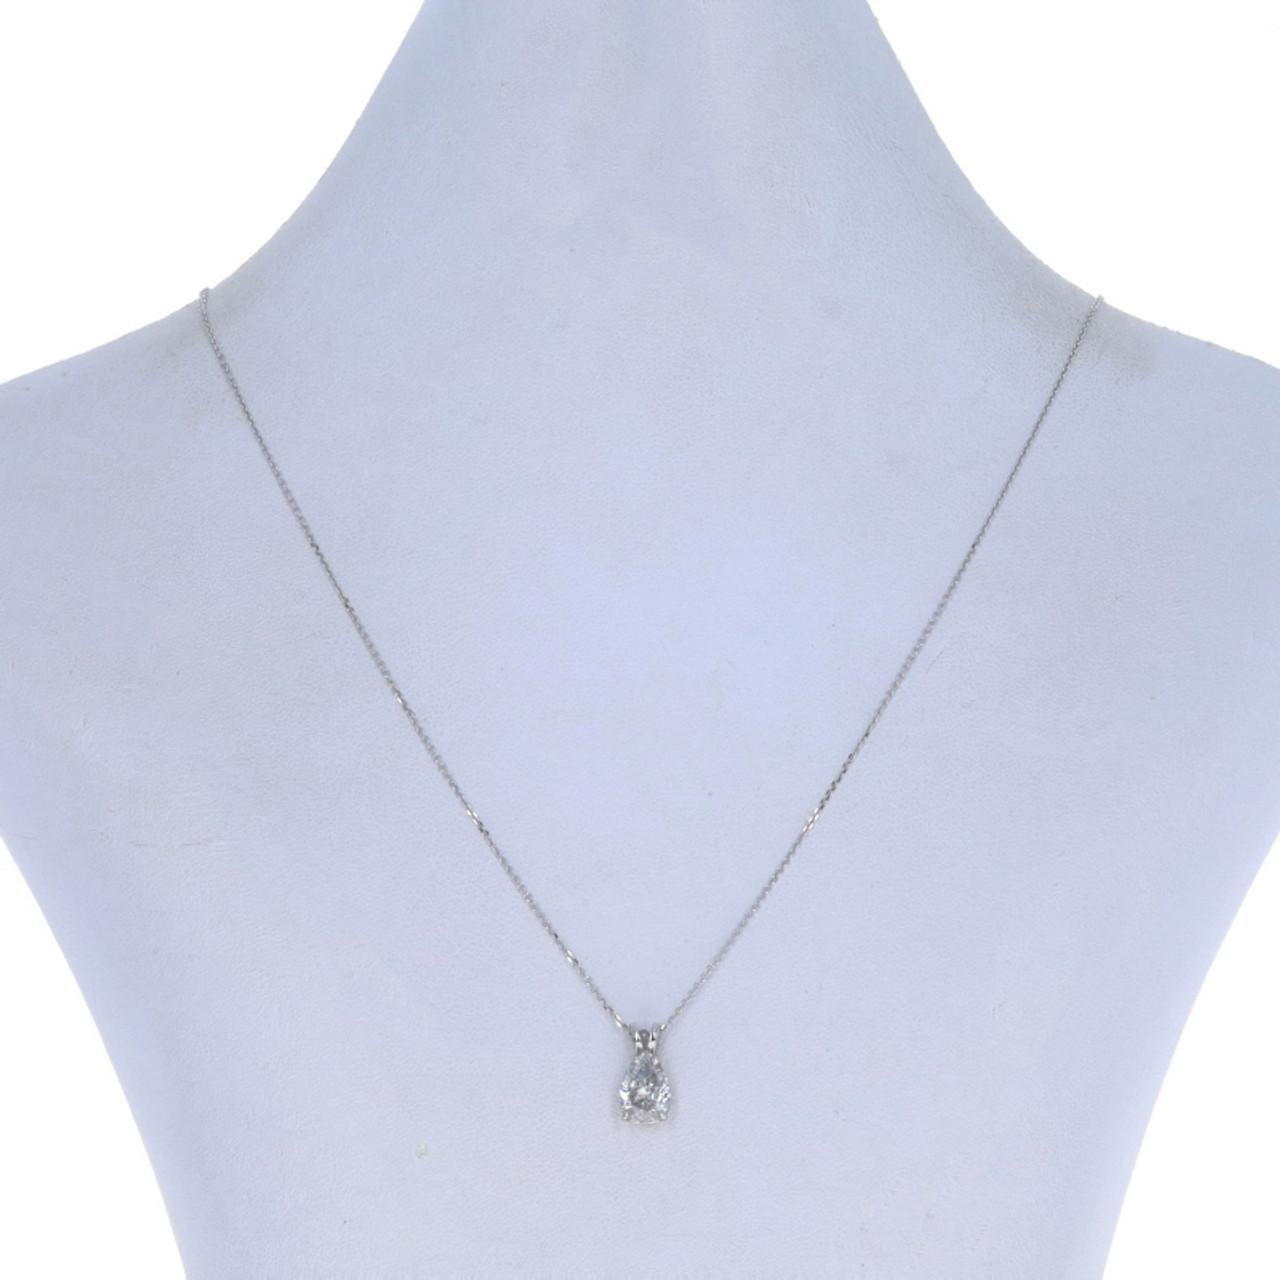 White Gold Diamond Solitaire Pendant Necklace 14k Pear 1.30ct Adjustable

Stone Information:
Natural Diamond
Carat(s): 1.30ct
Cut: Pear
Color: G
Clarity: I1

Total Carats: 1.30ct

Additional information:
Material: Metal 14k White Gold
Style: